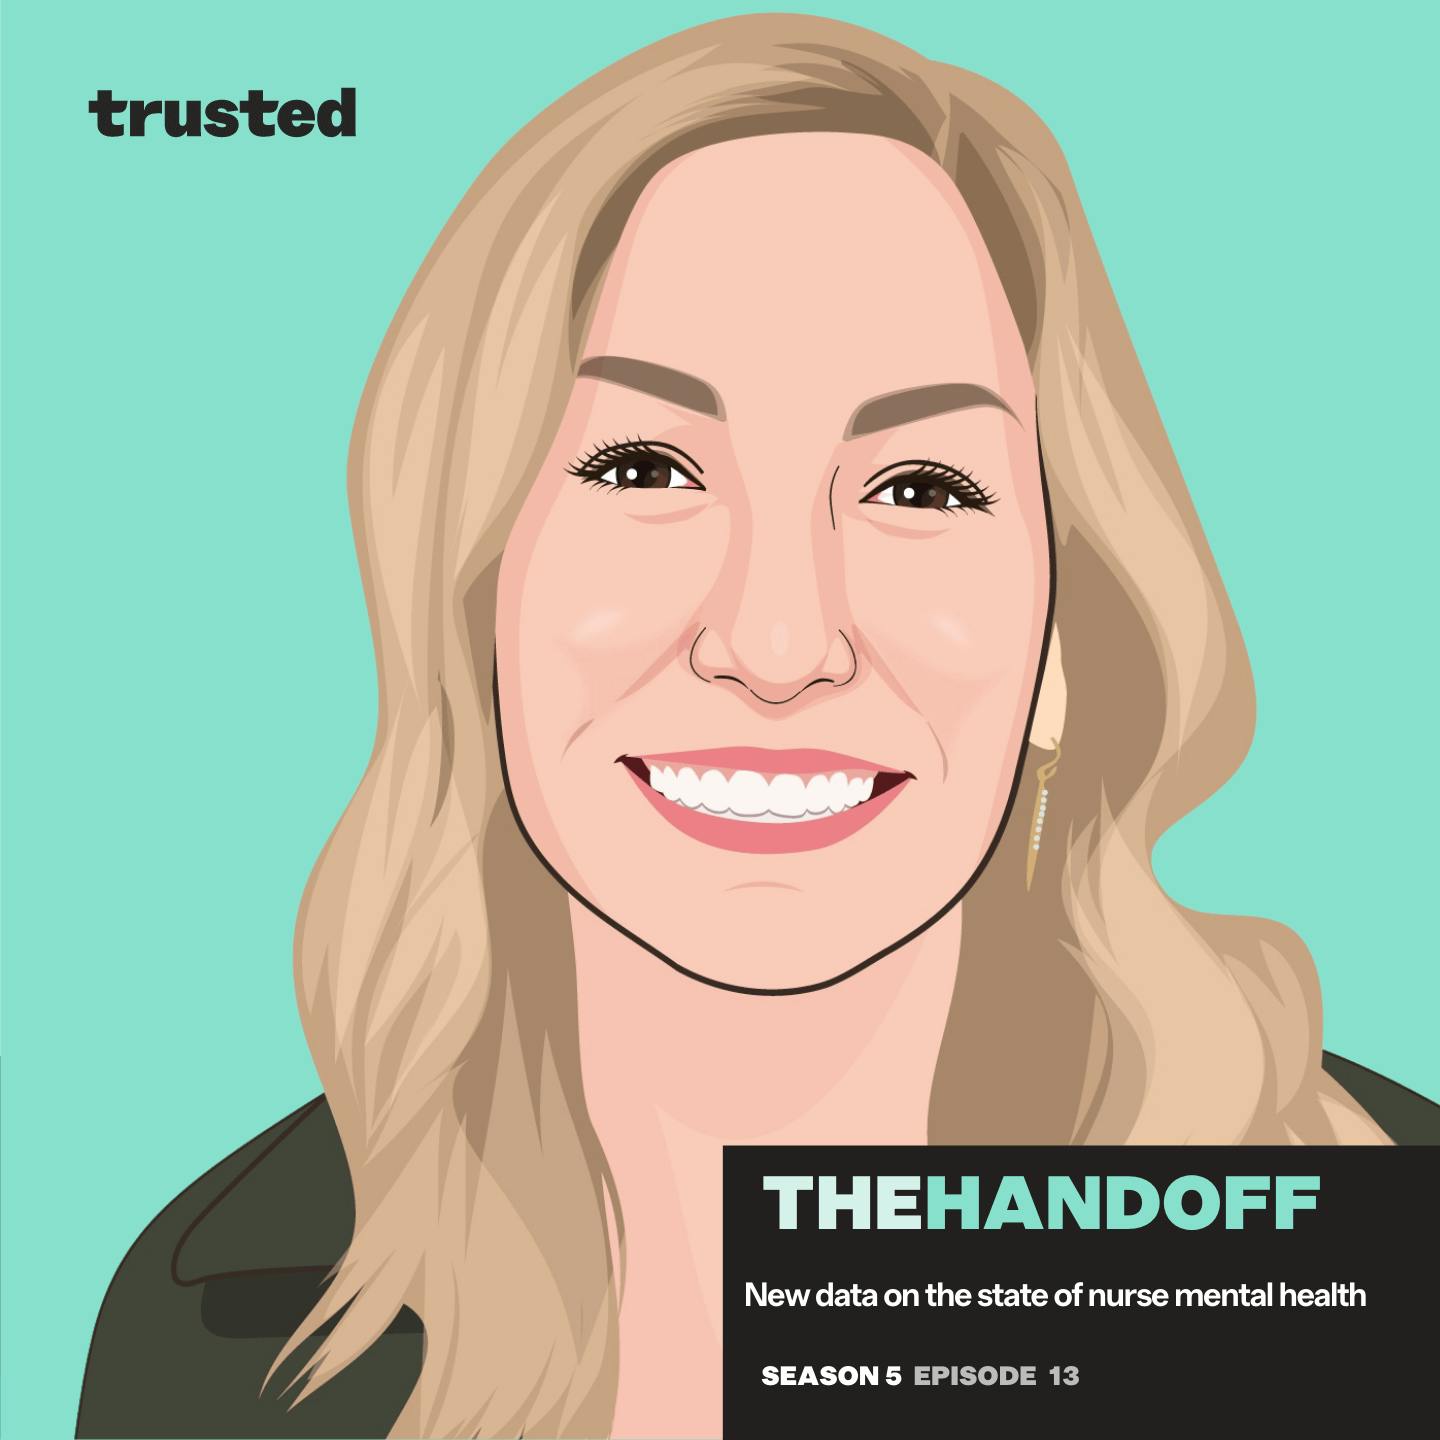 The Handoff Podcast: New data on the state of nurse mental health